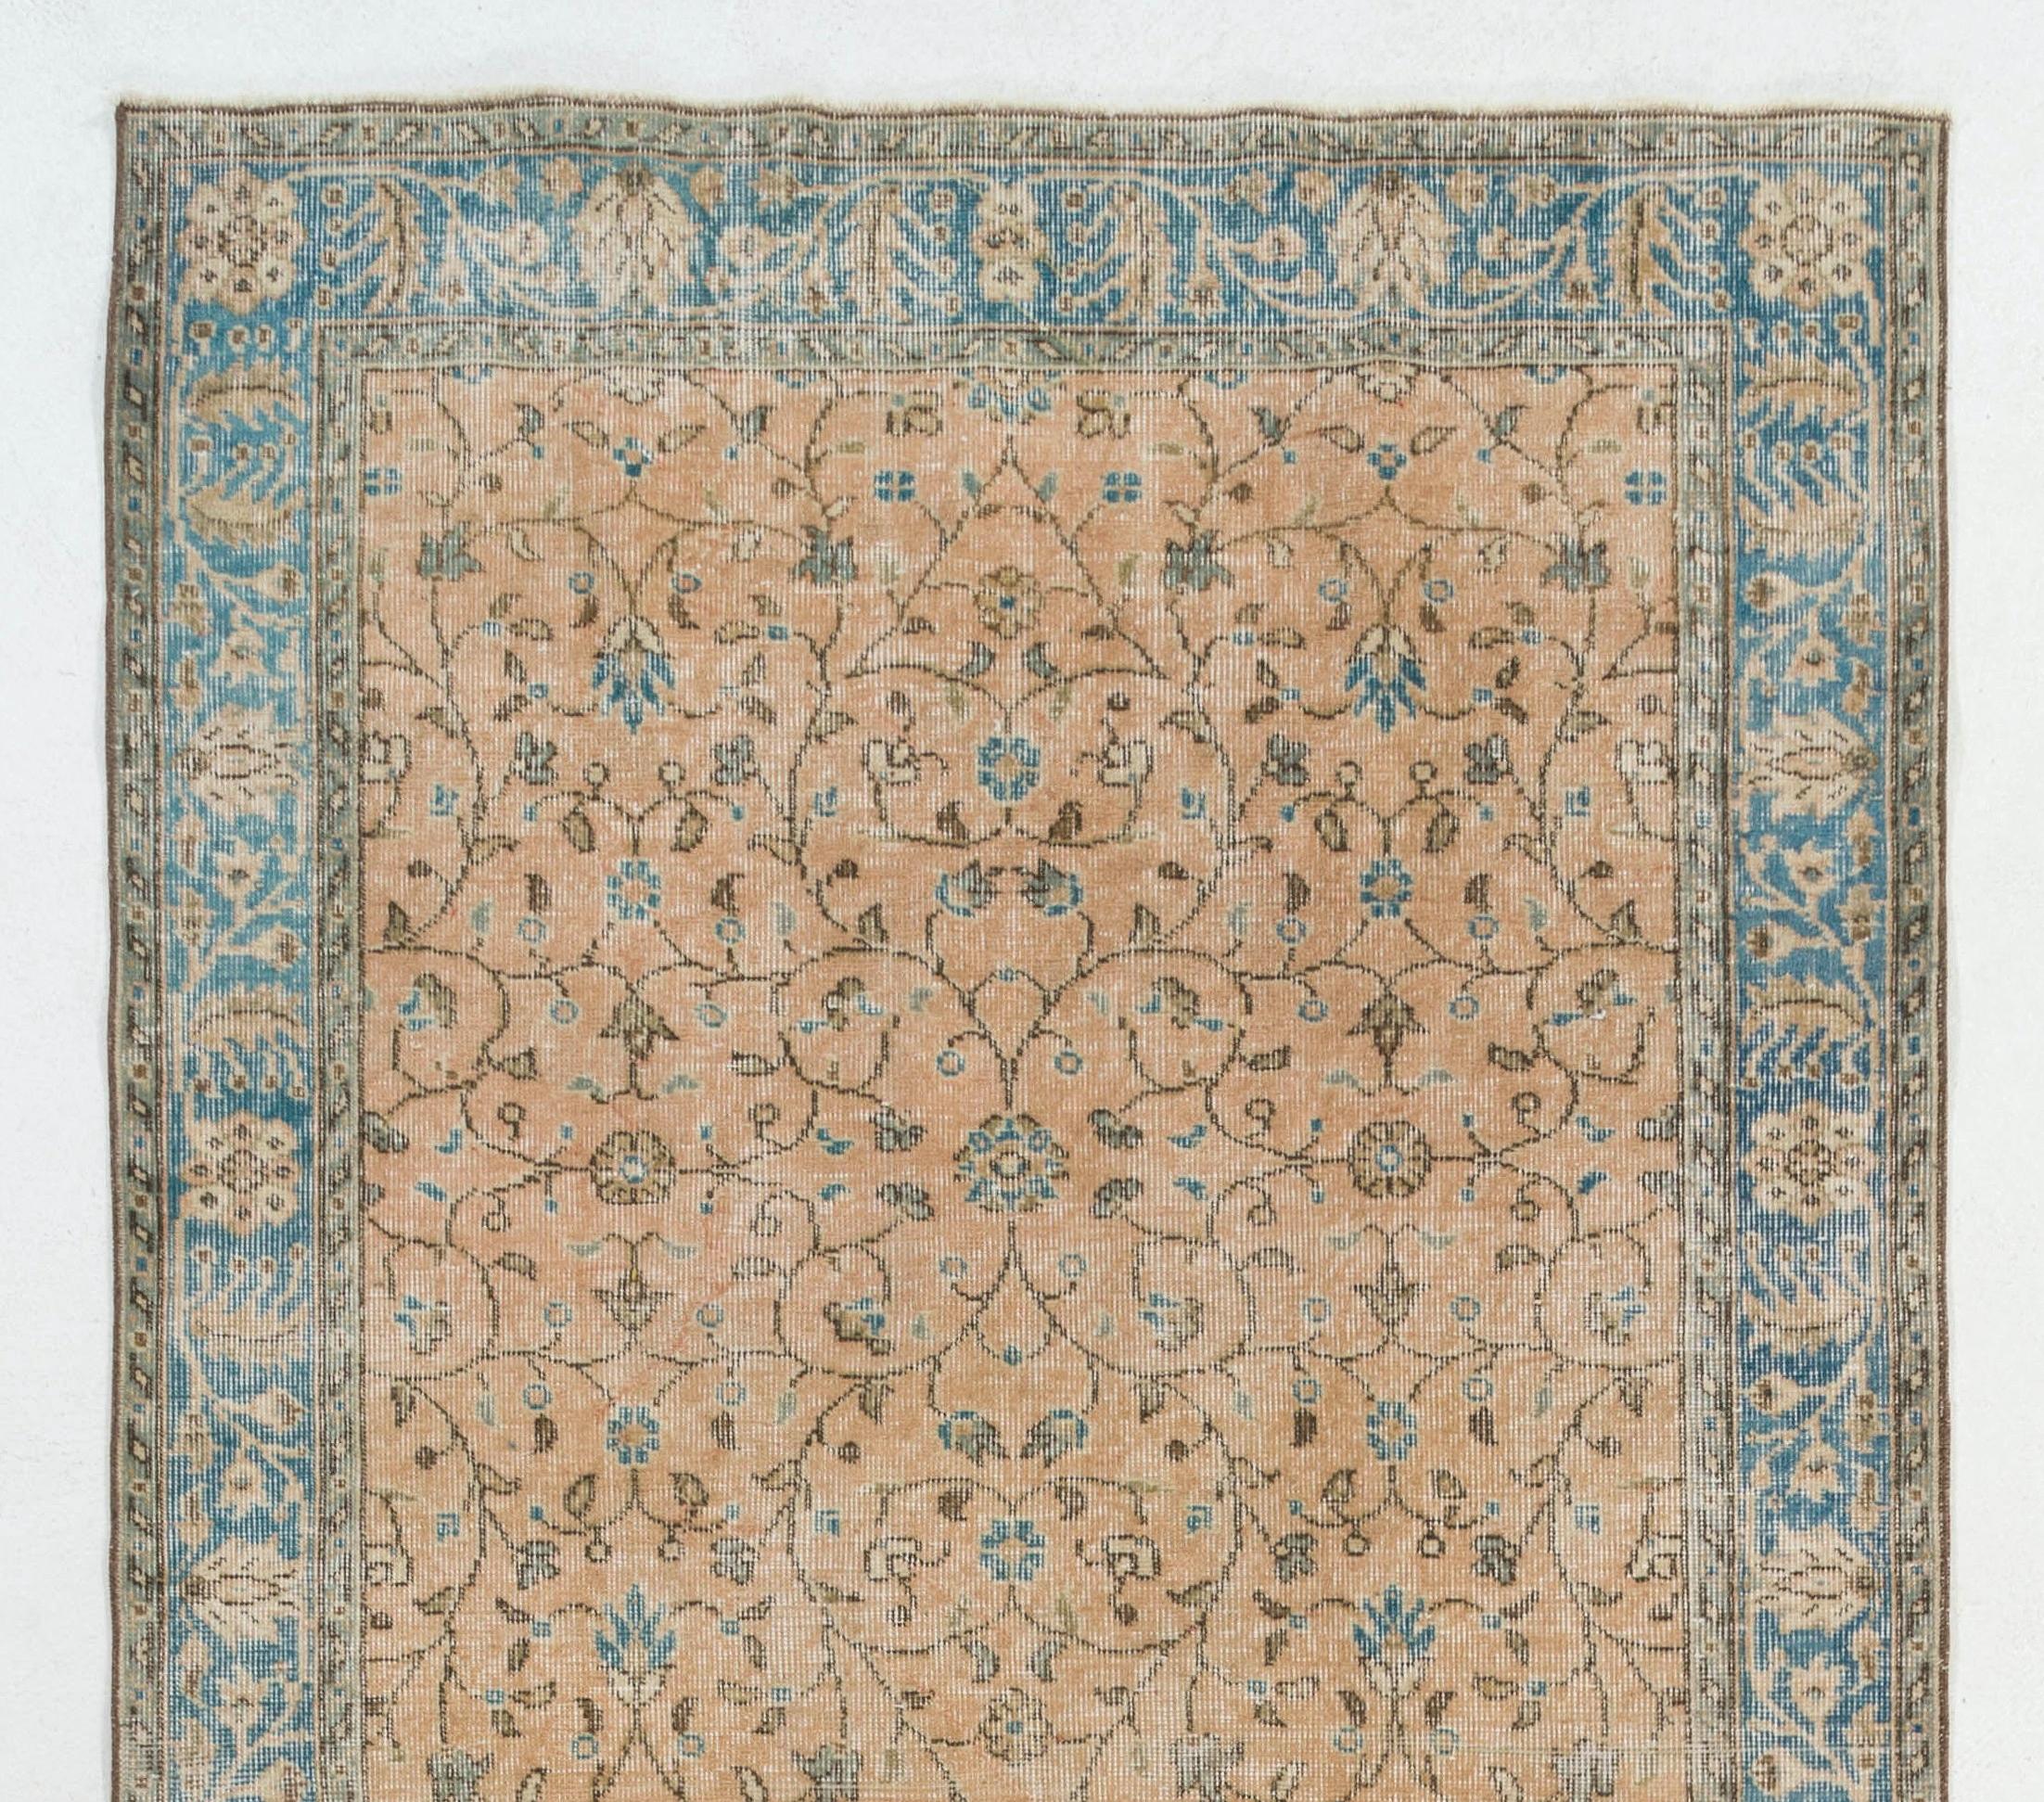 A vintage hand-knotted runner rug from Central Turkey with an all-over design of scrolling floral and leafy vines against a coral pink background and a border in faded blue decorated with palmettes, rosettes and serrated leaves. 

The rug has low